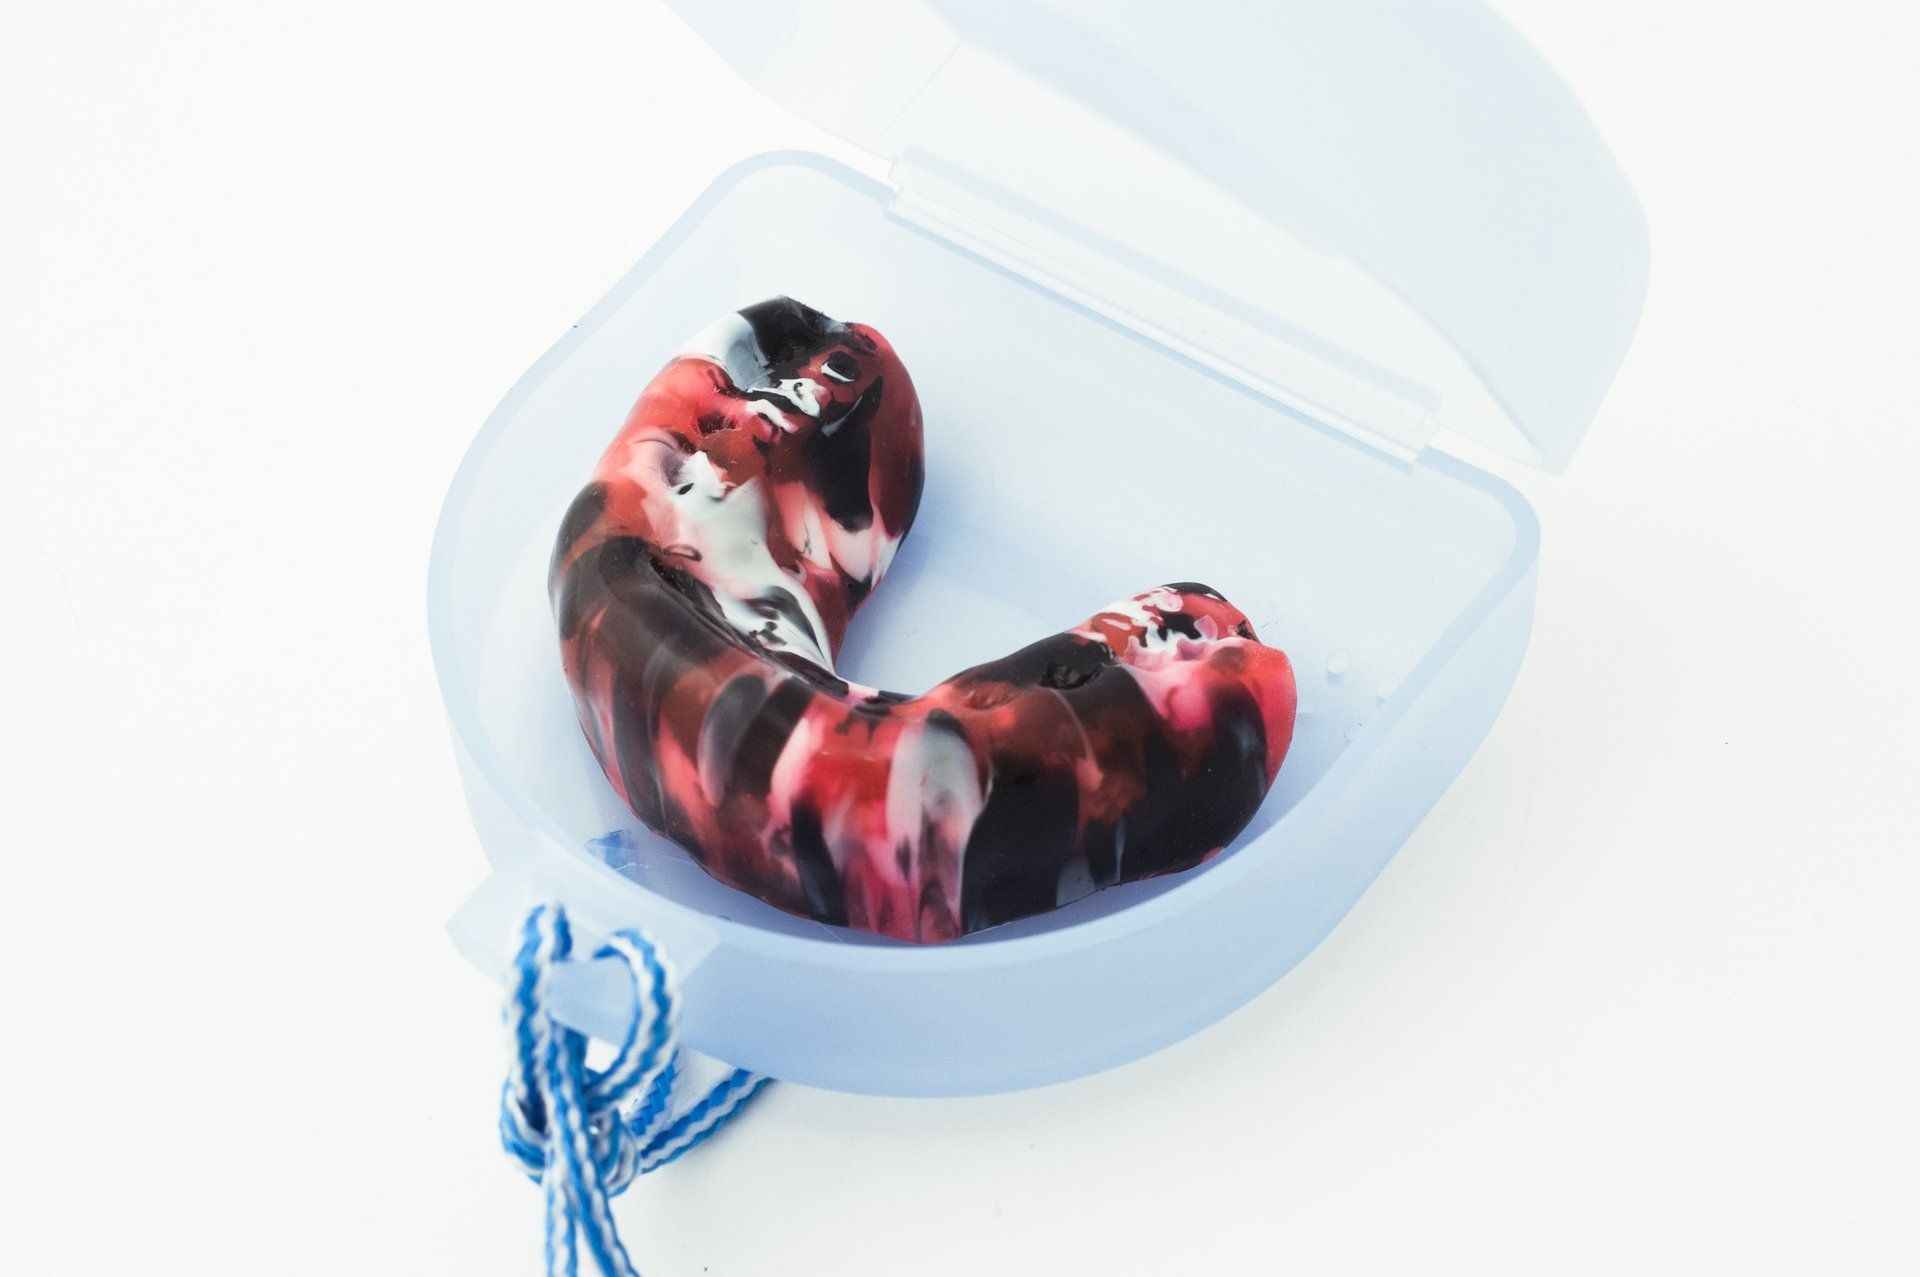 mouthguard in red and blue case